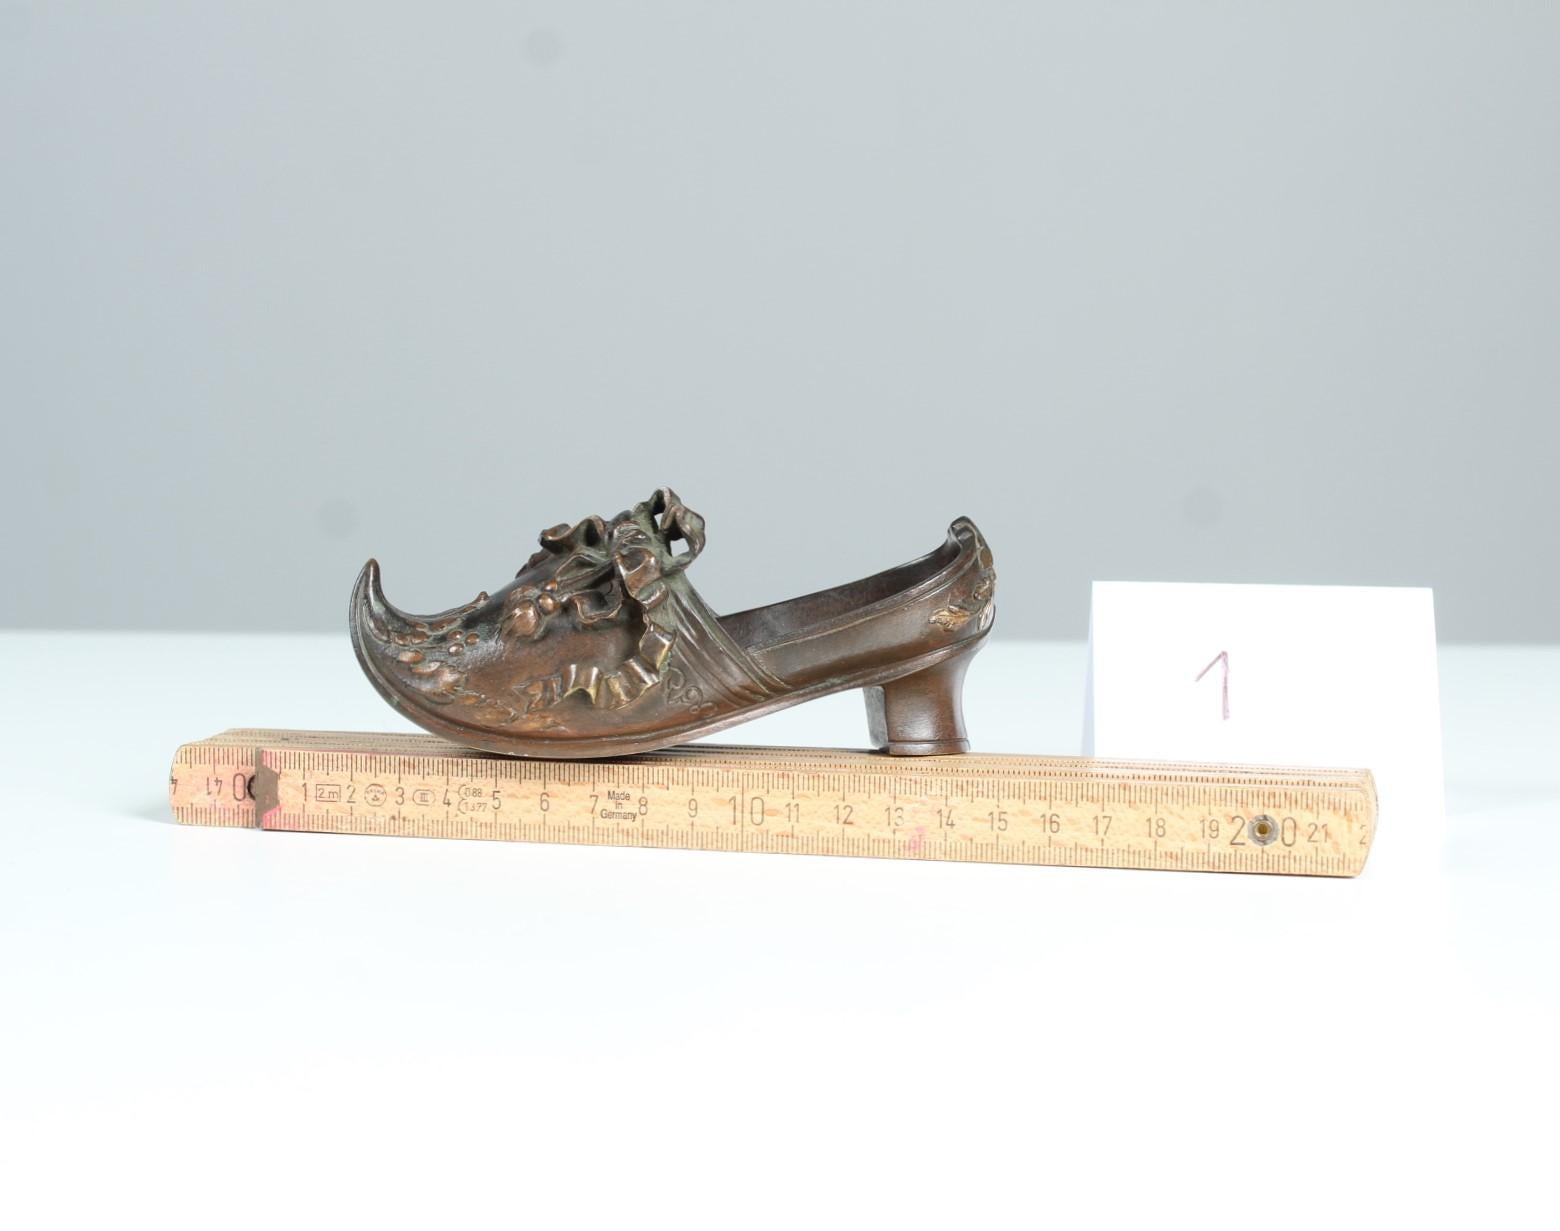 Antique Bronze Sculpture, Jewelry Tray, French Shoe, Late 19th Century, France In Good Condition For Sale In Greven, DE